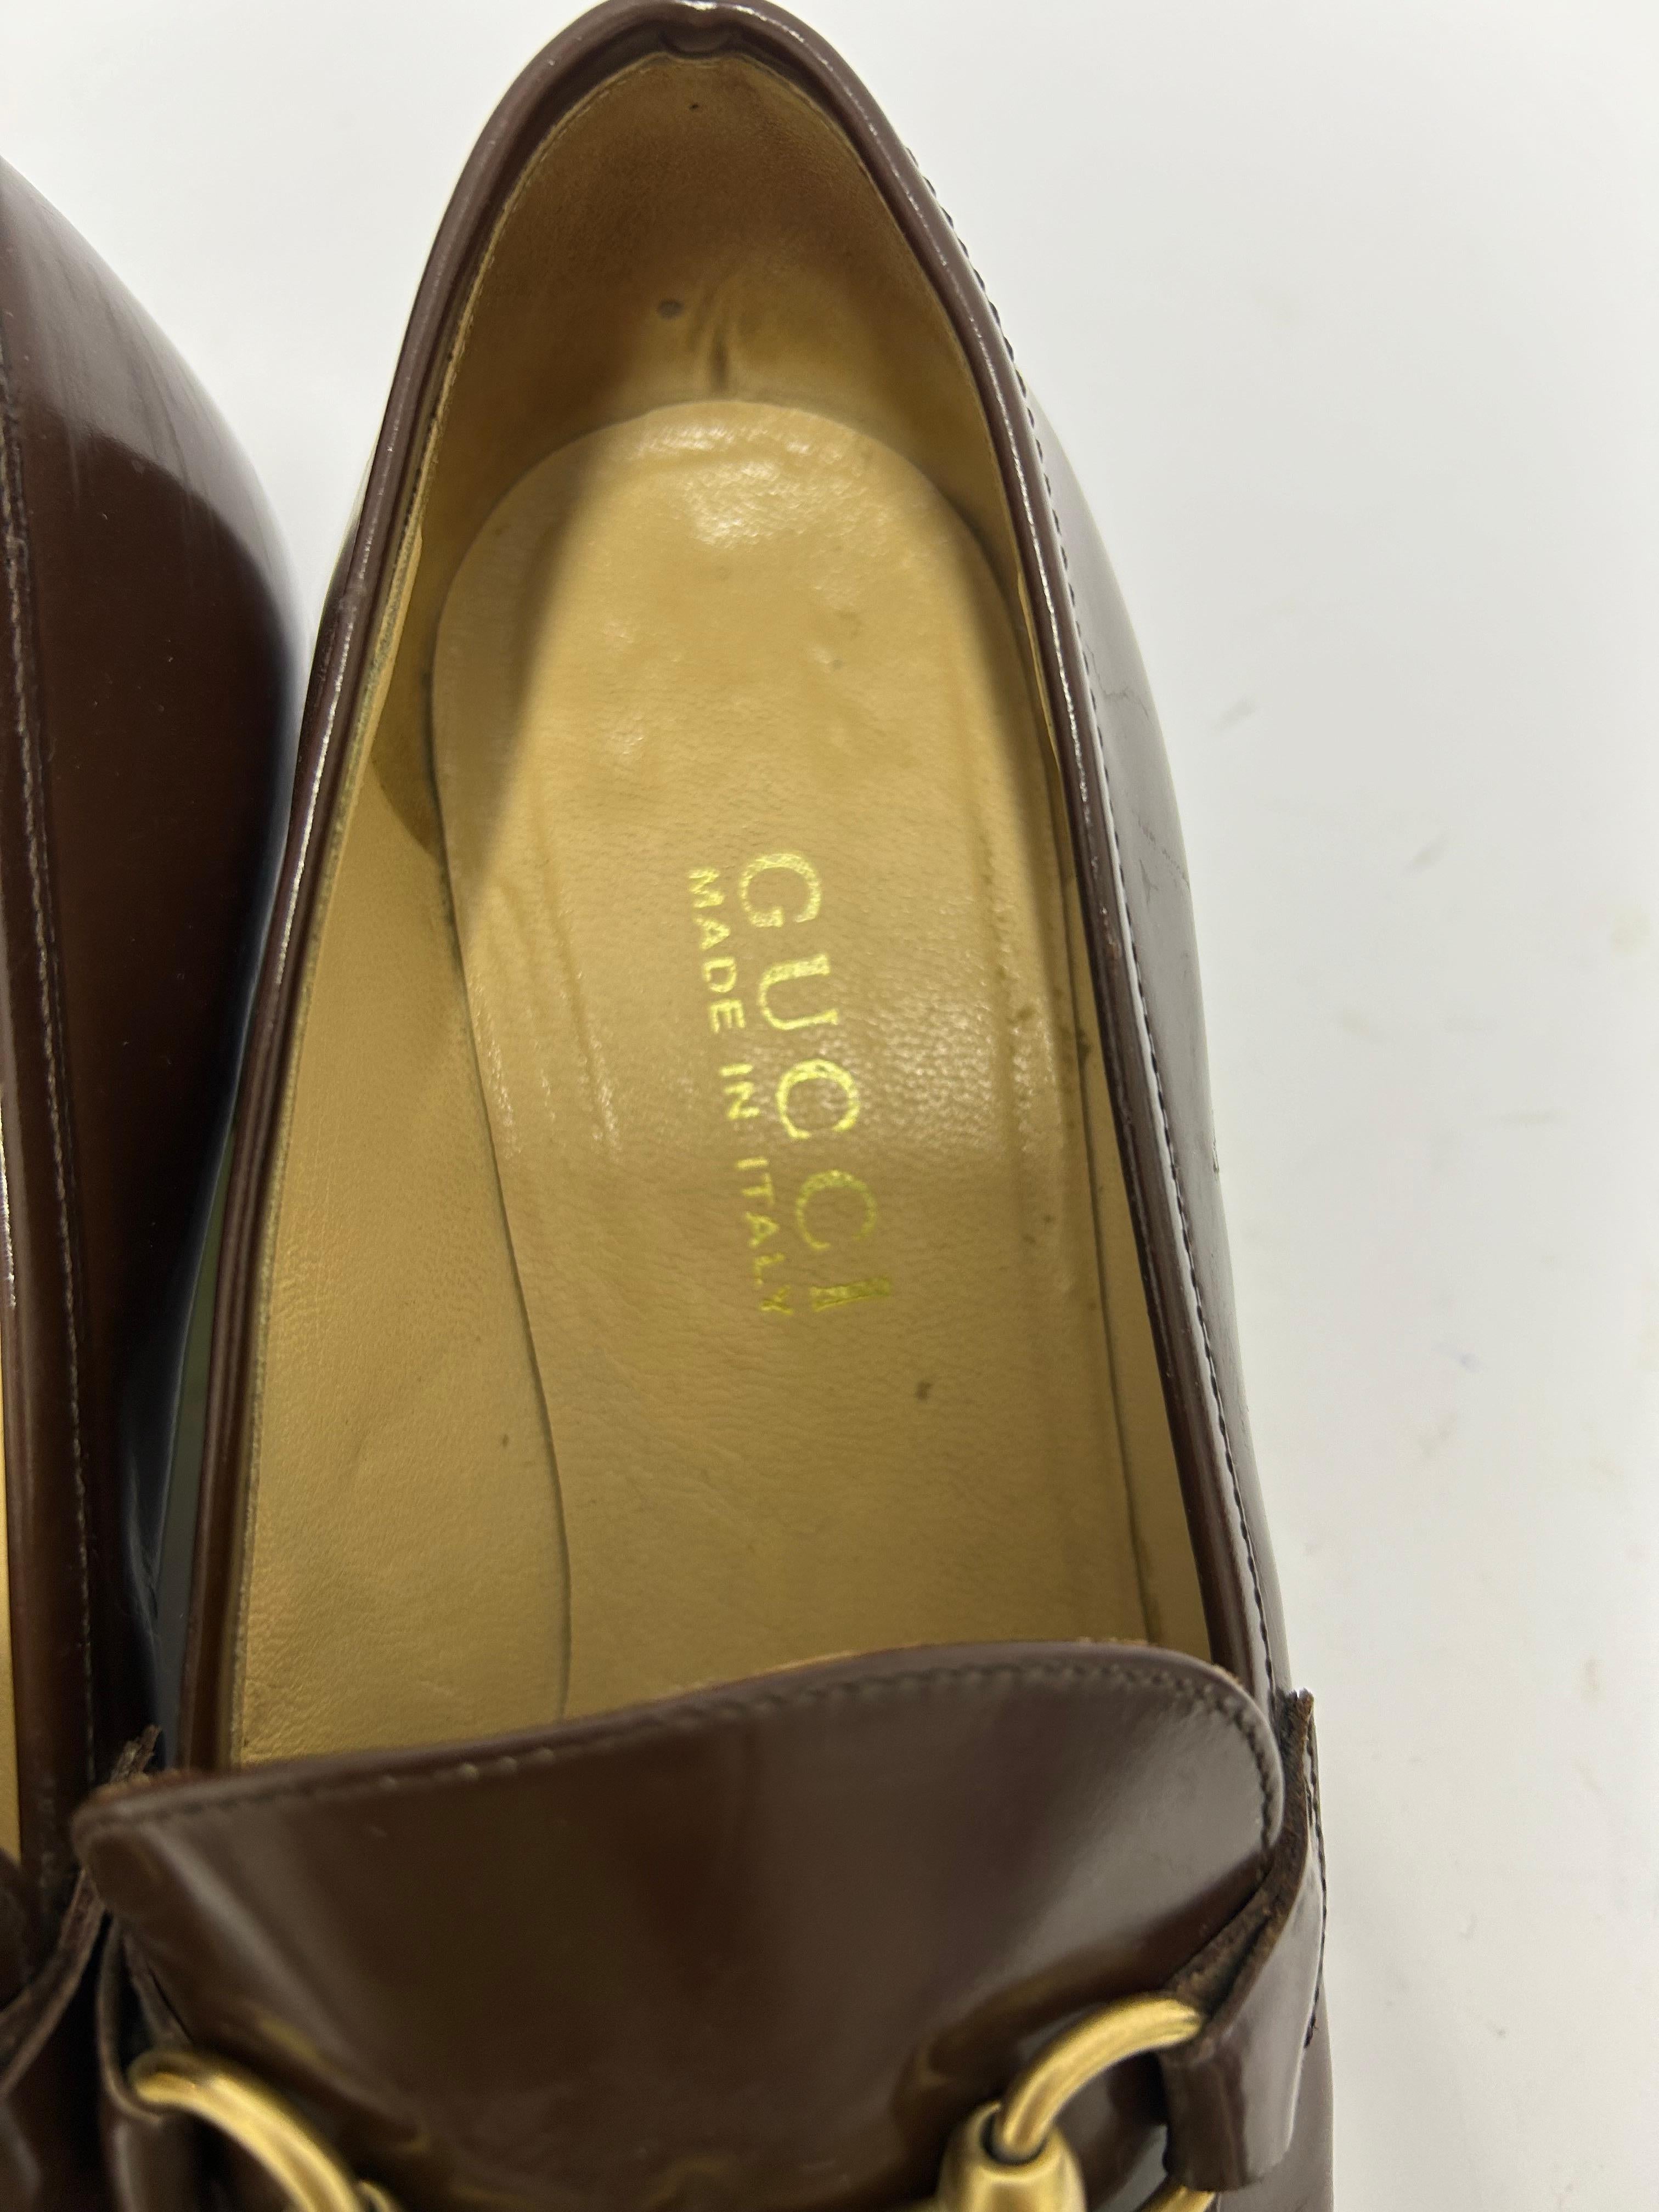 Gucci Horsebit Leather Loafers Size EU 36.5 For Sale 6